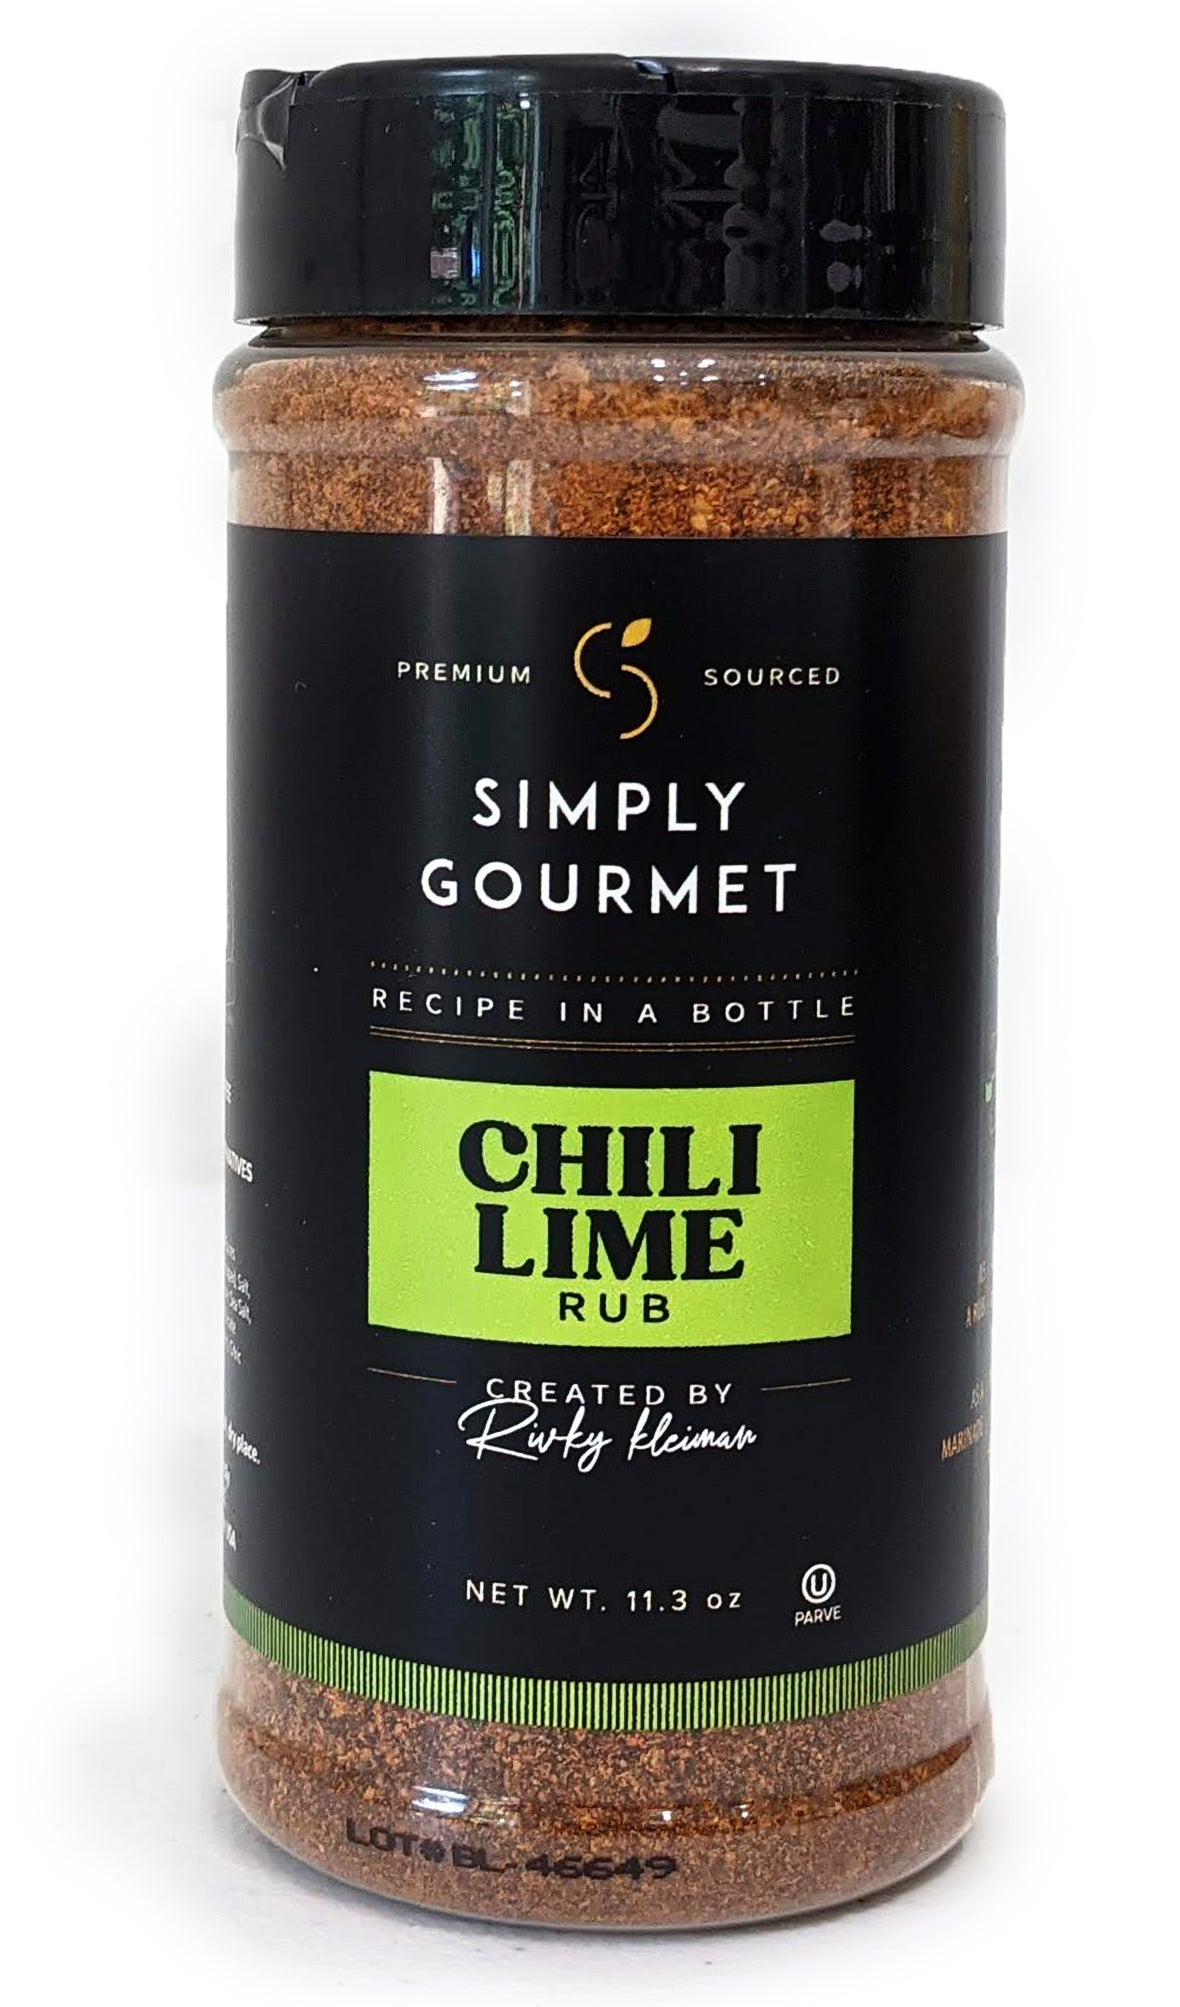 Simply Sublime Chili Lime